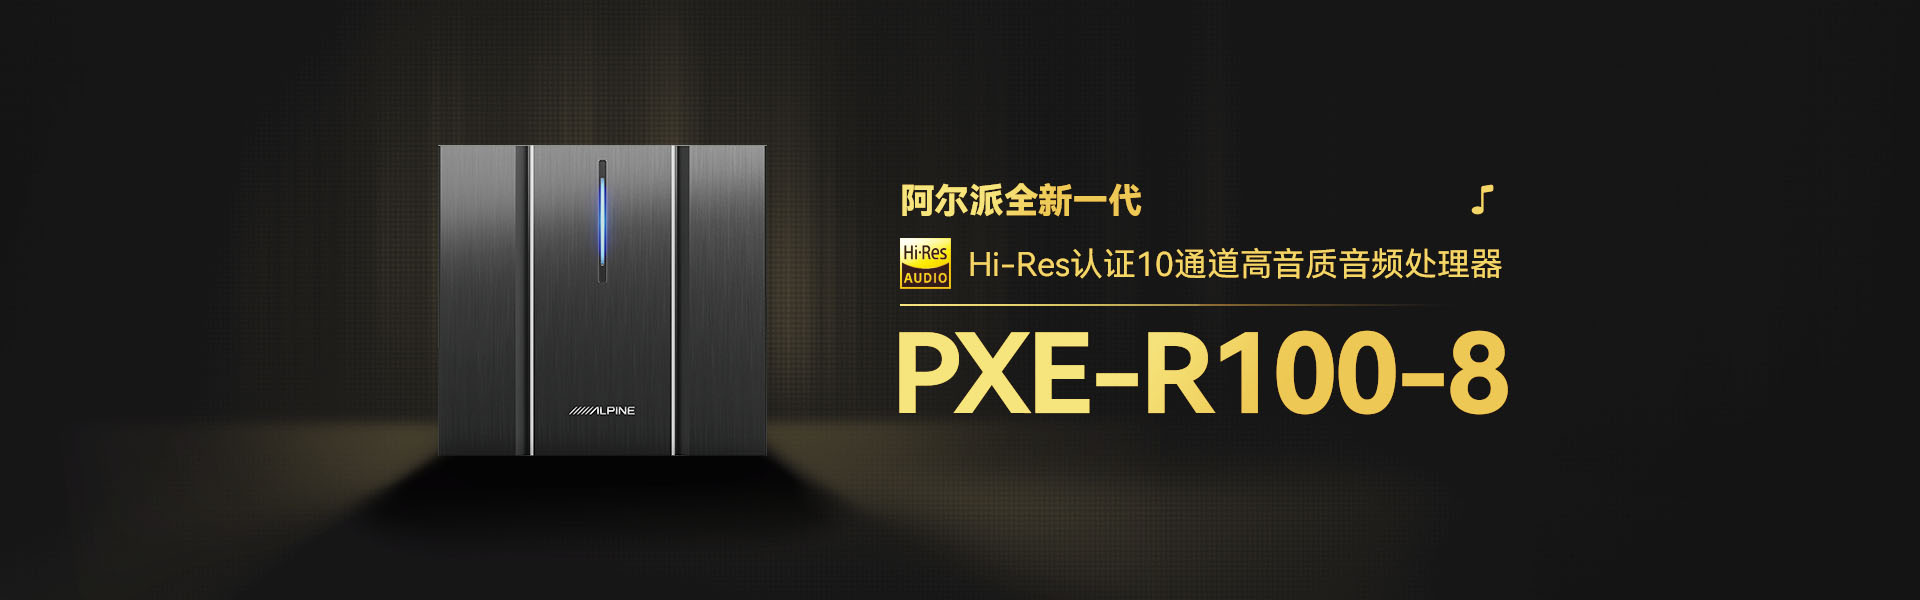 PXE-R100-8